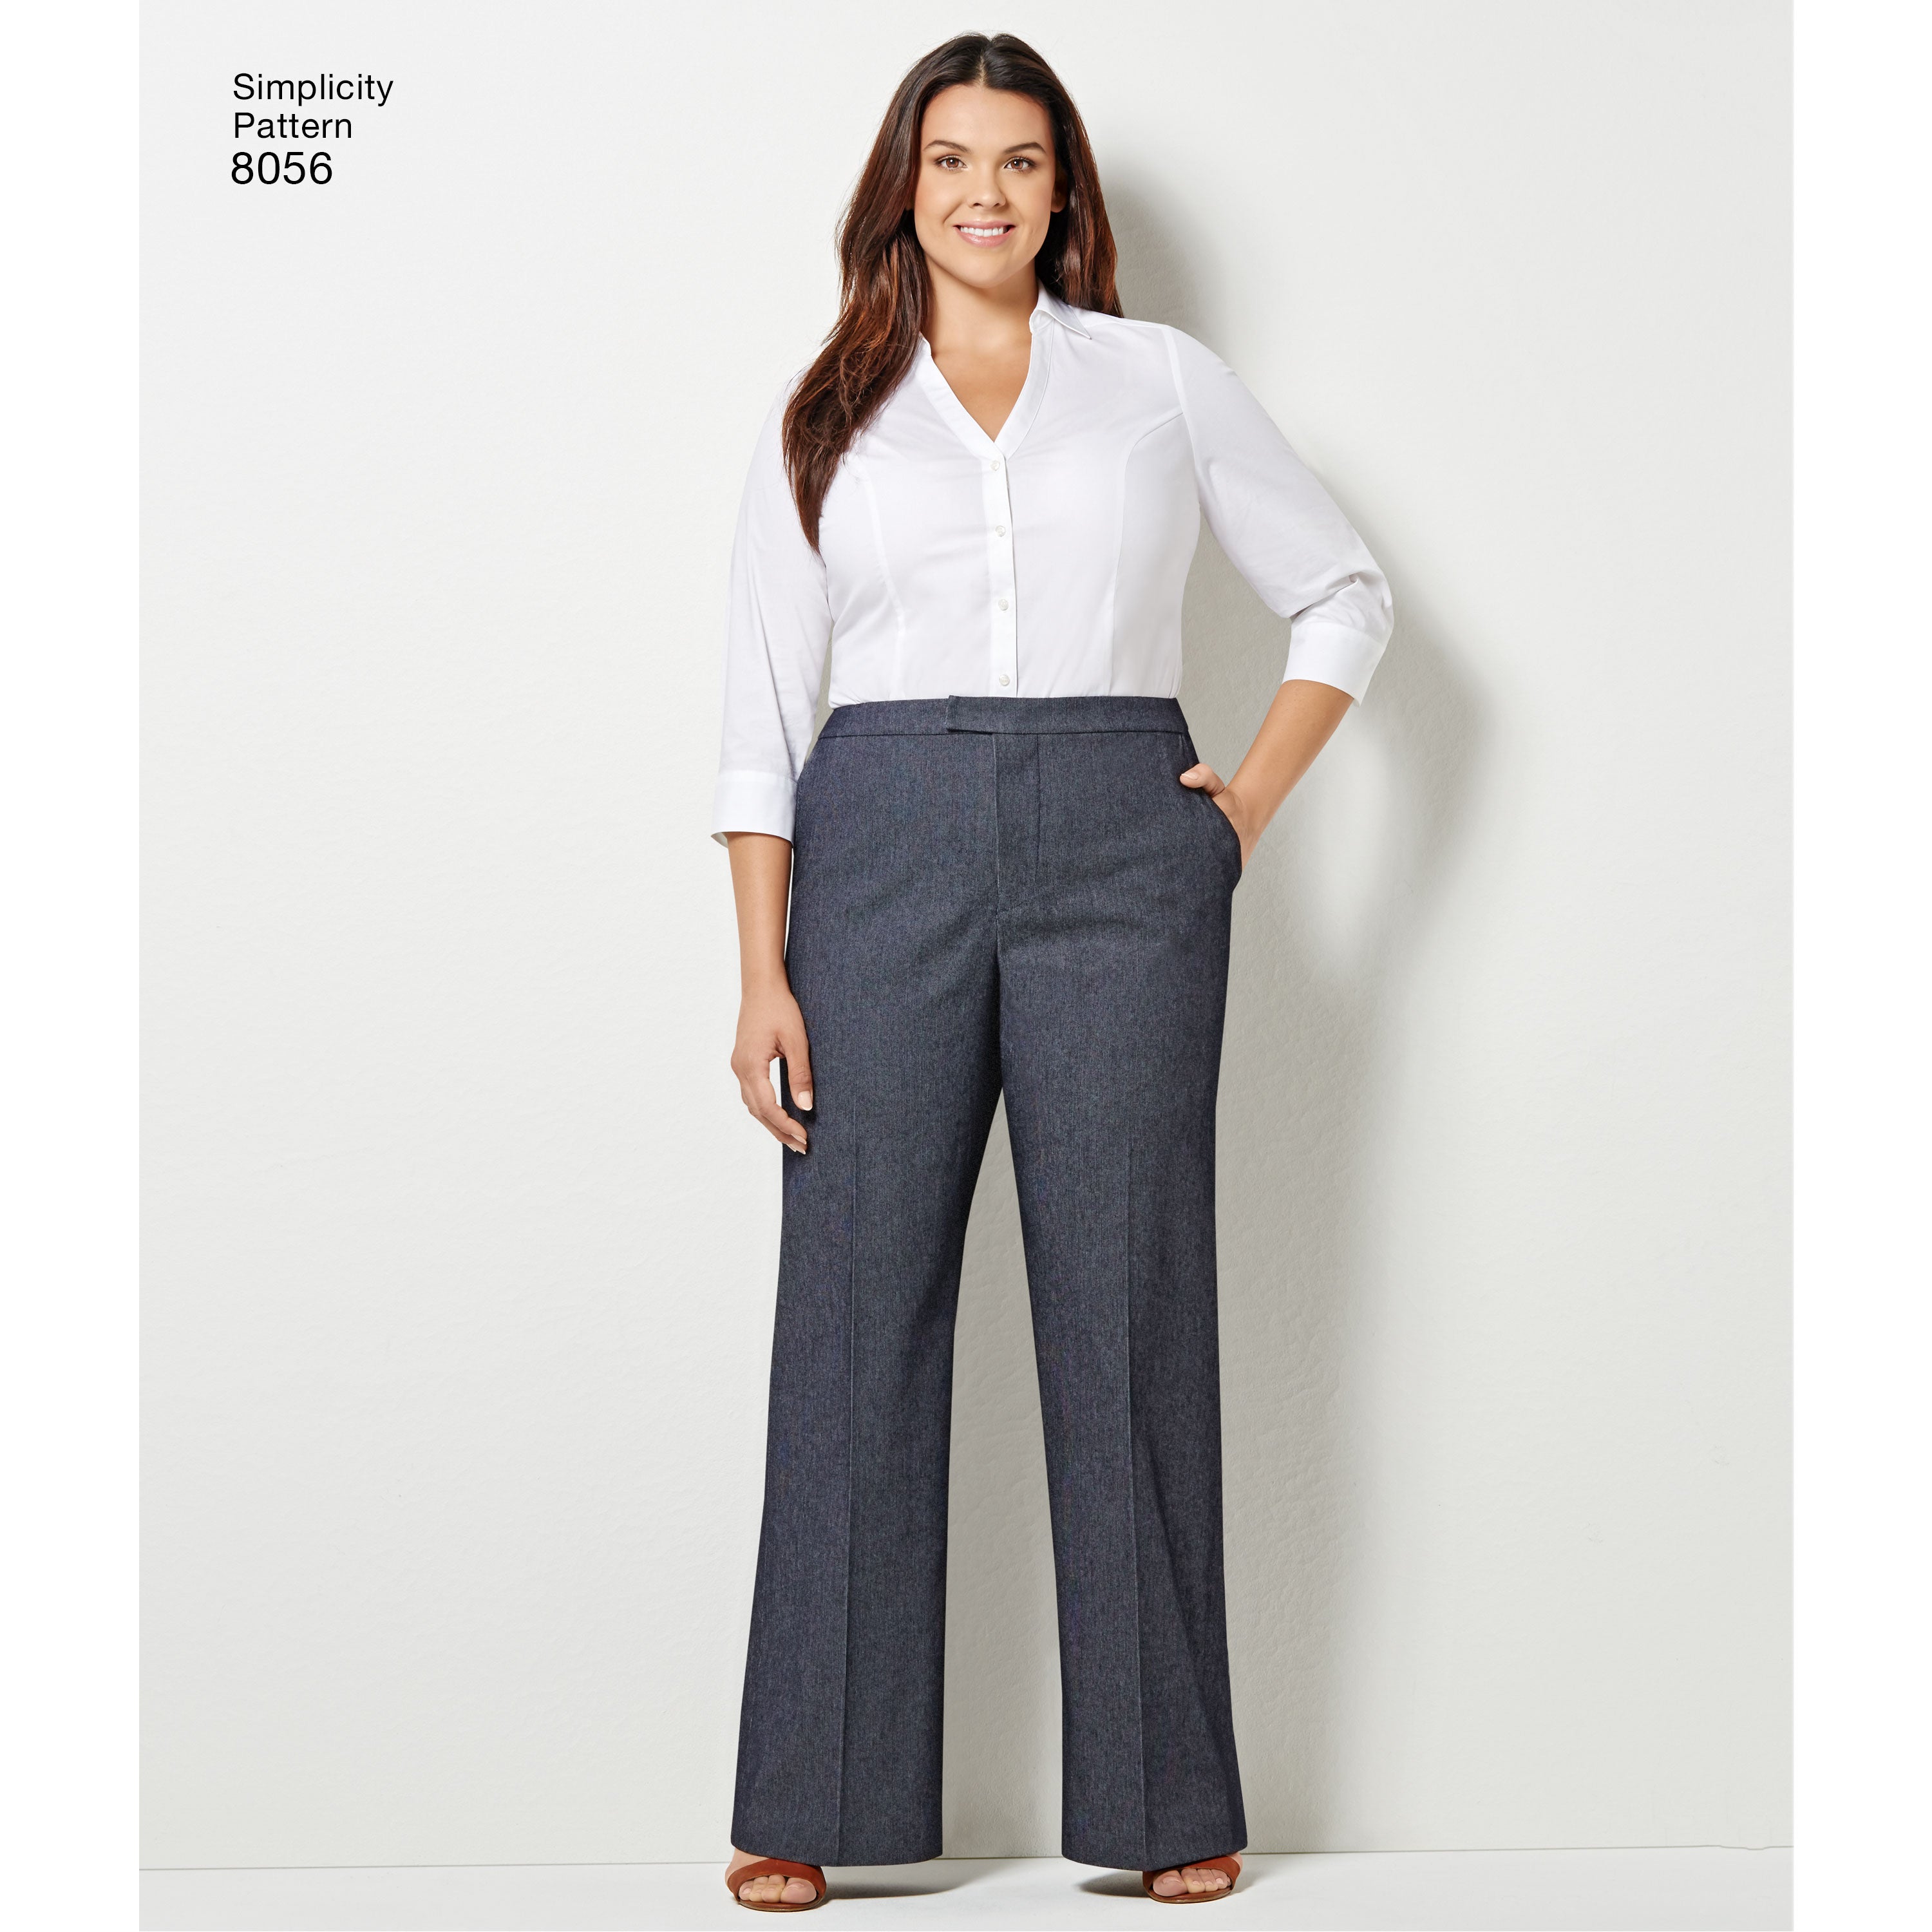 Sailor Sue Palazzo Pant Sewing Pattern – Casual Patterns – Style Arc